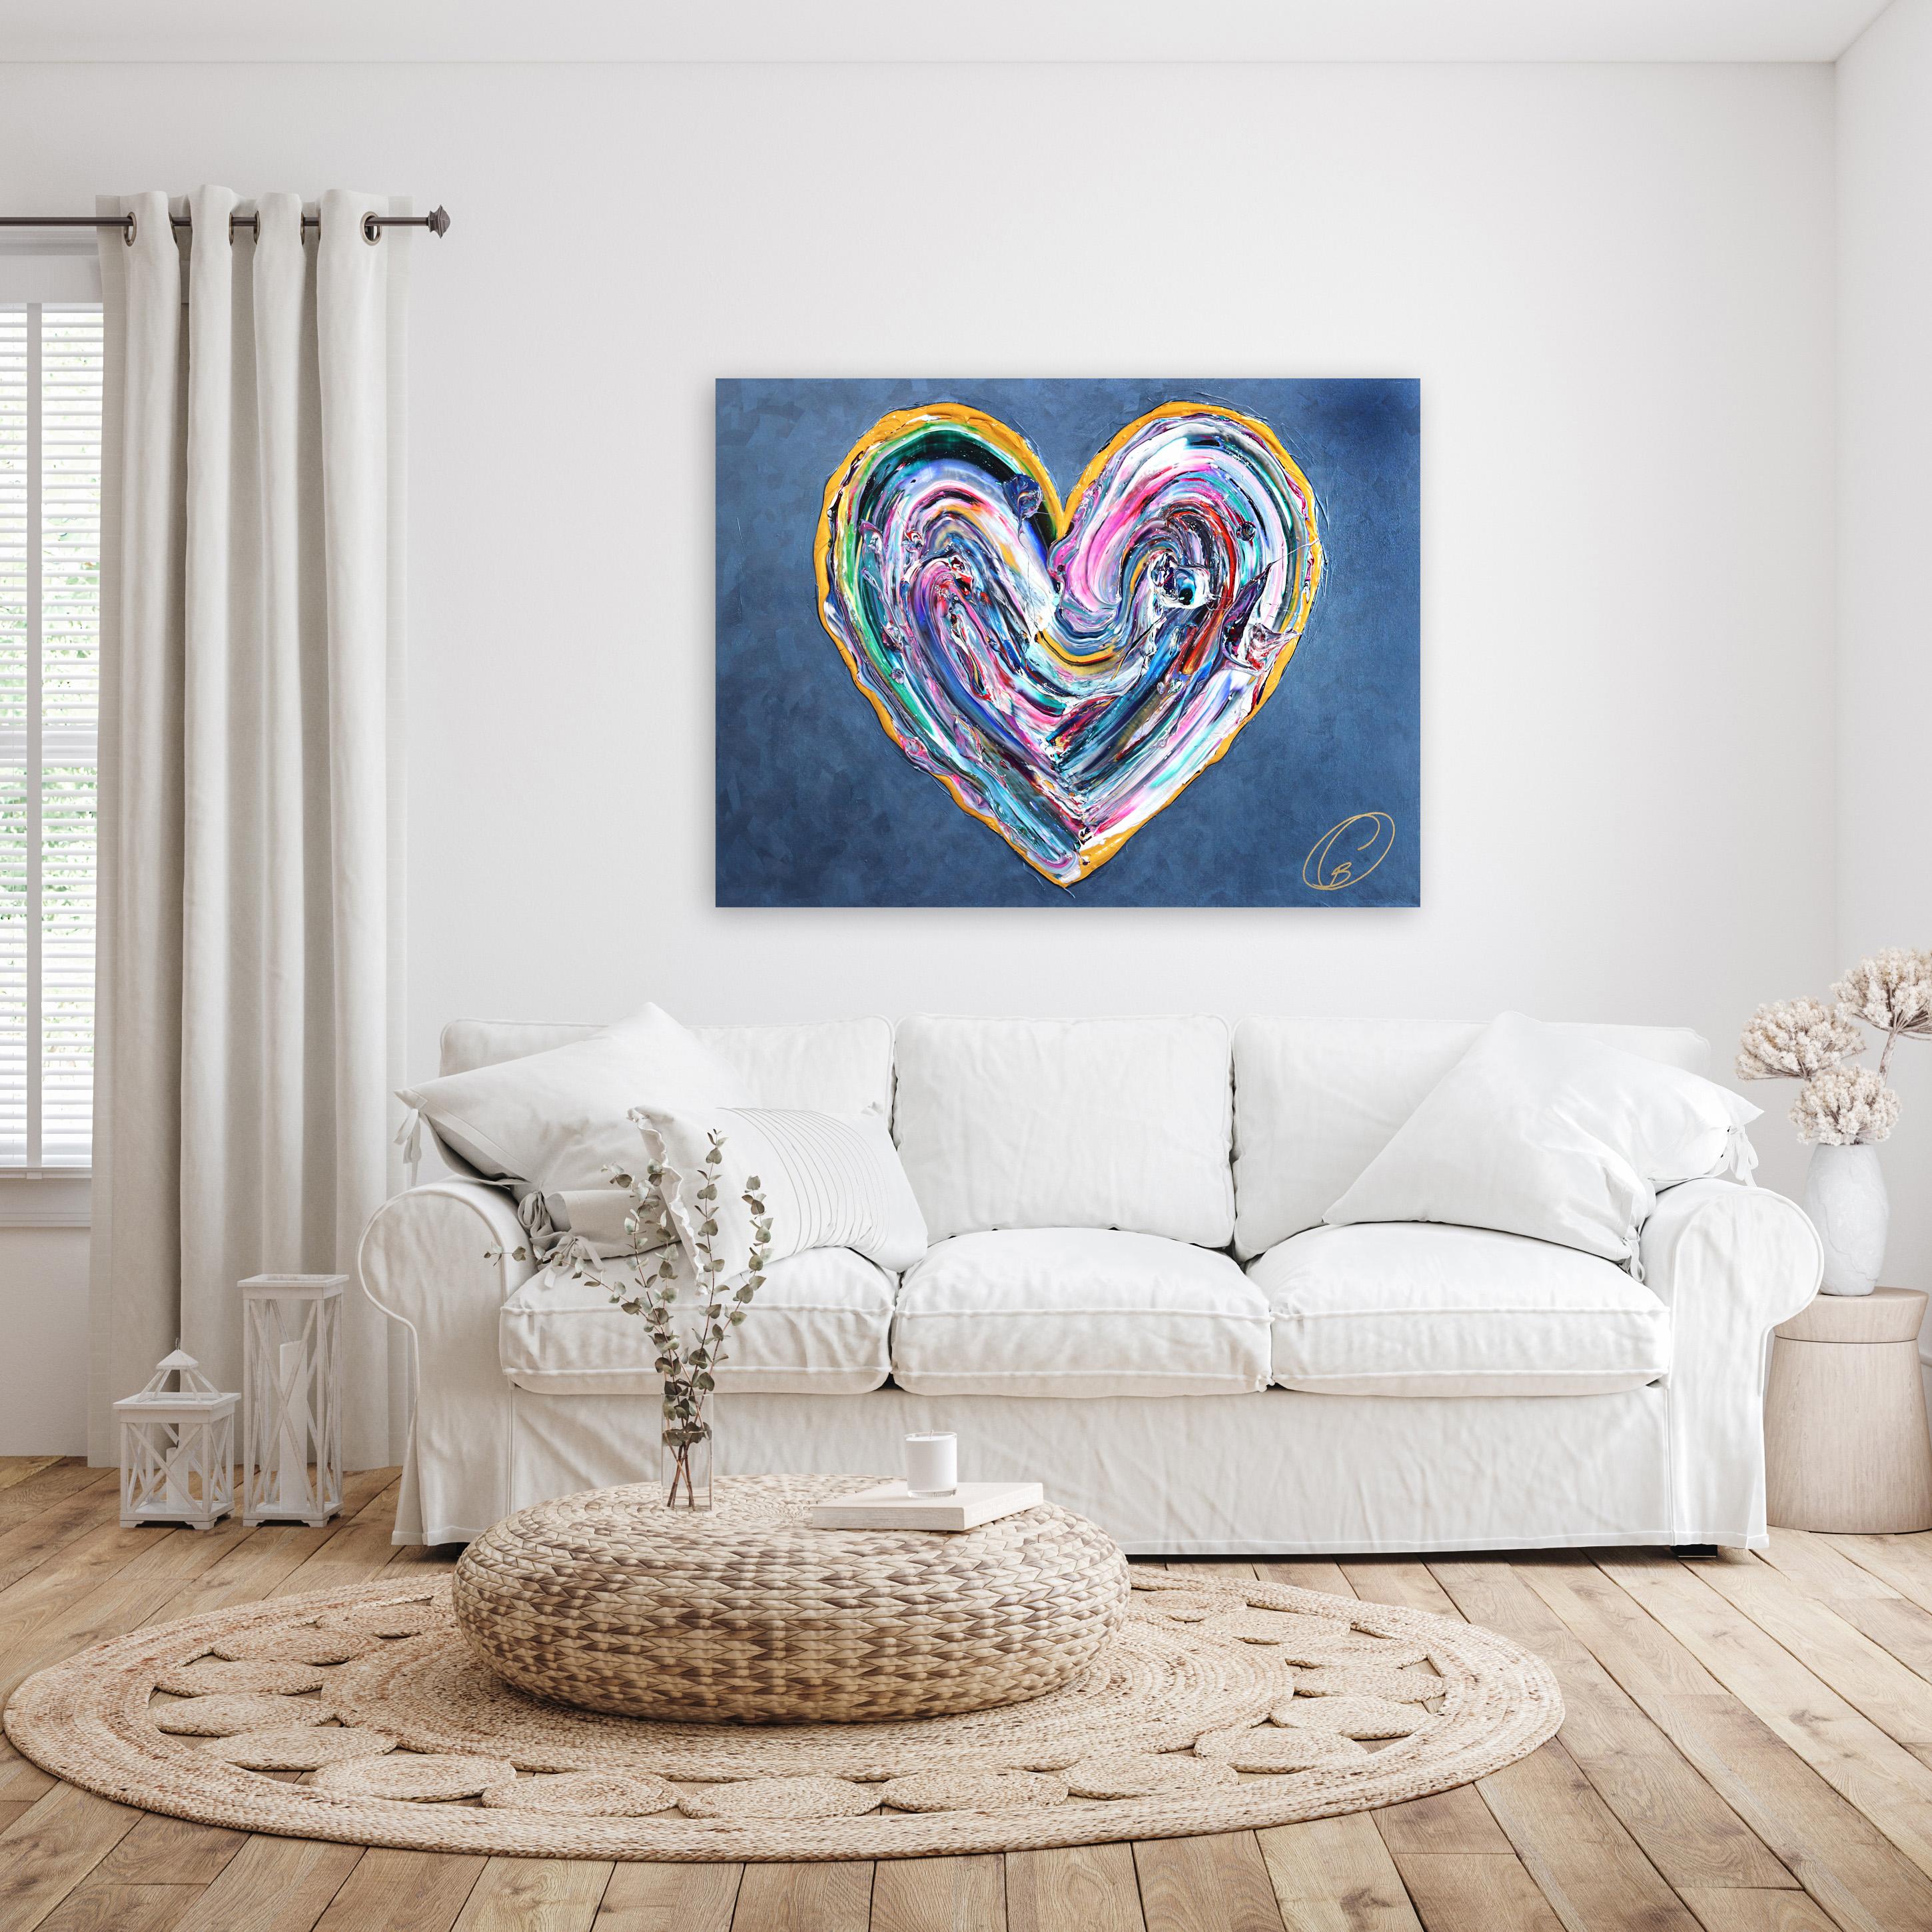 Dreamy Lover - Impasto Thick Paint Original Artwork - Painting by Cynthia Coulombe Bégin